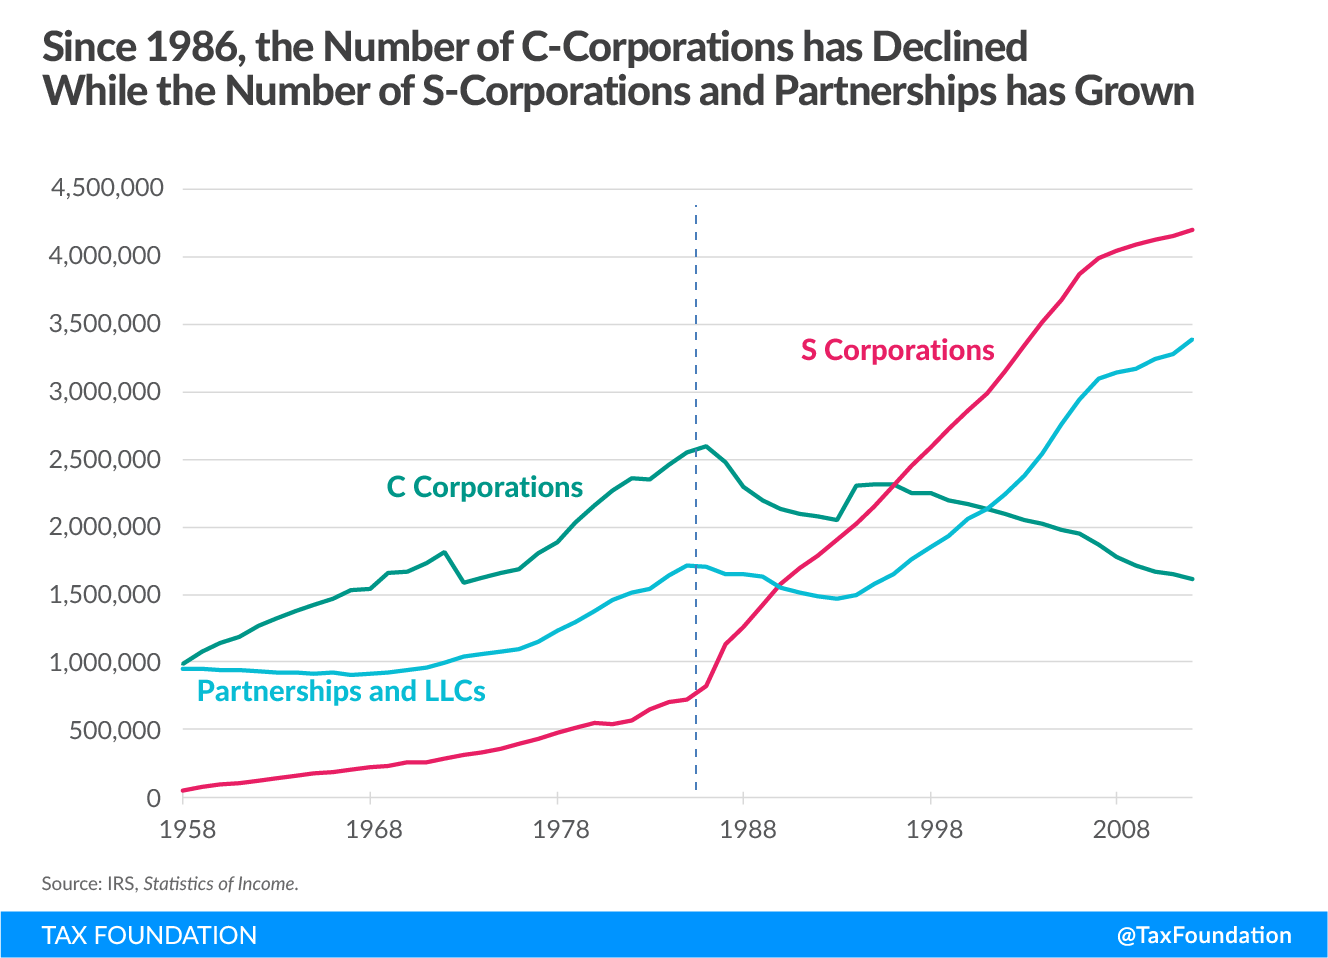 Since 1986, the number of C-corporations has declined while the number of s-corporations and partnerships has grown, entrepreneurship, u.s. progressive tax code, income inequality, 70 percent tax, saez and zucman